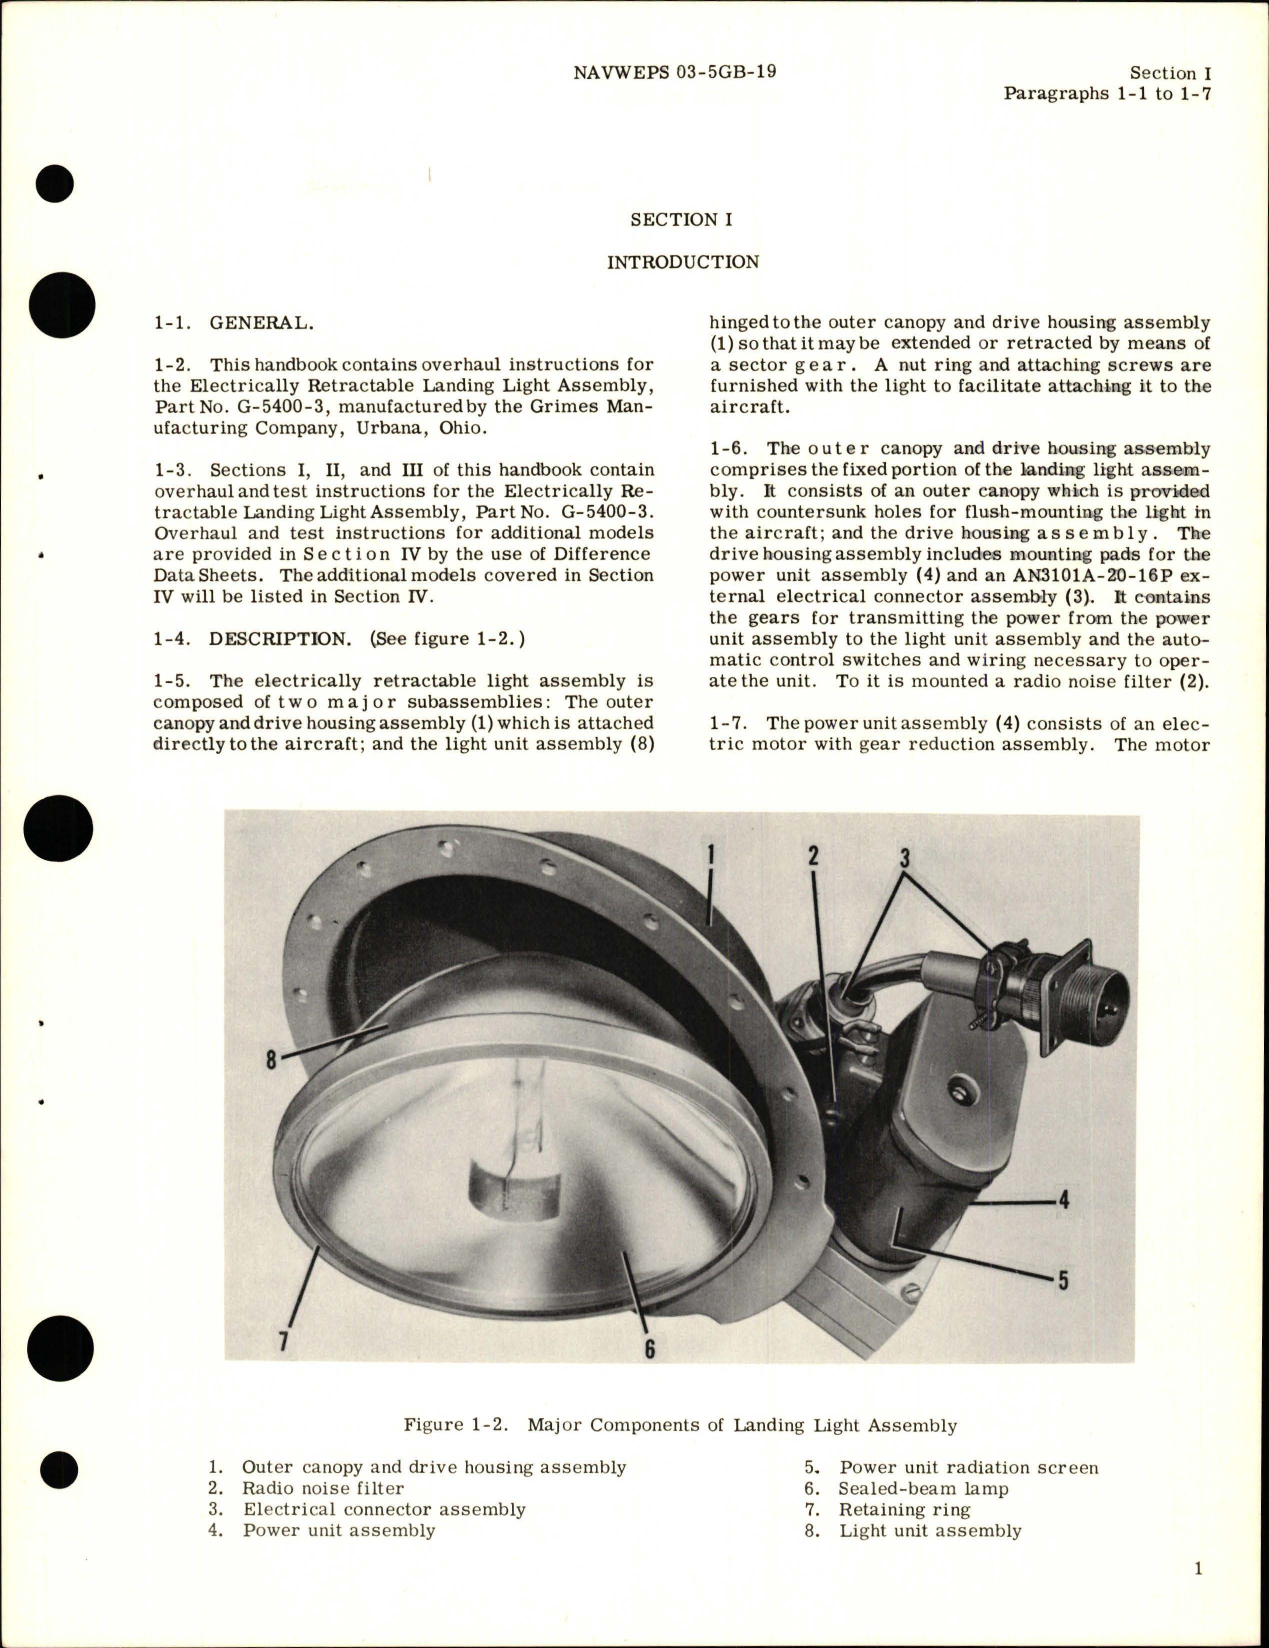 Sample page 5 from AirCorps Library document: Overhaul Instructions for Electrically Retractable Landing Light Assembly 